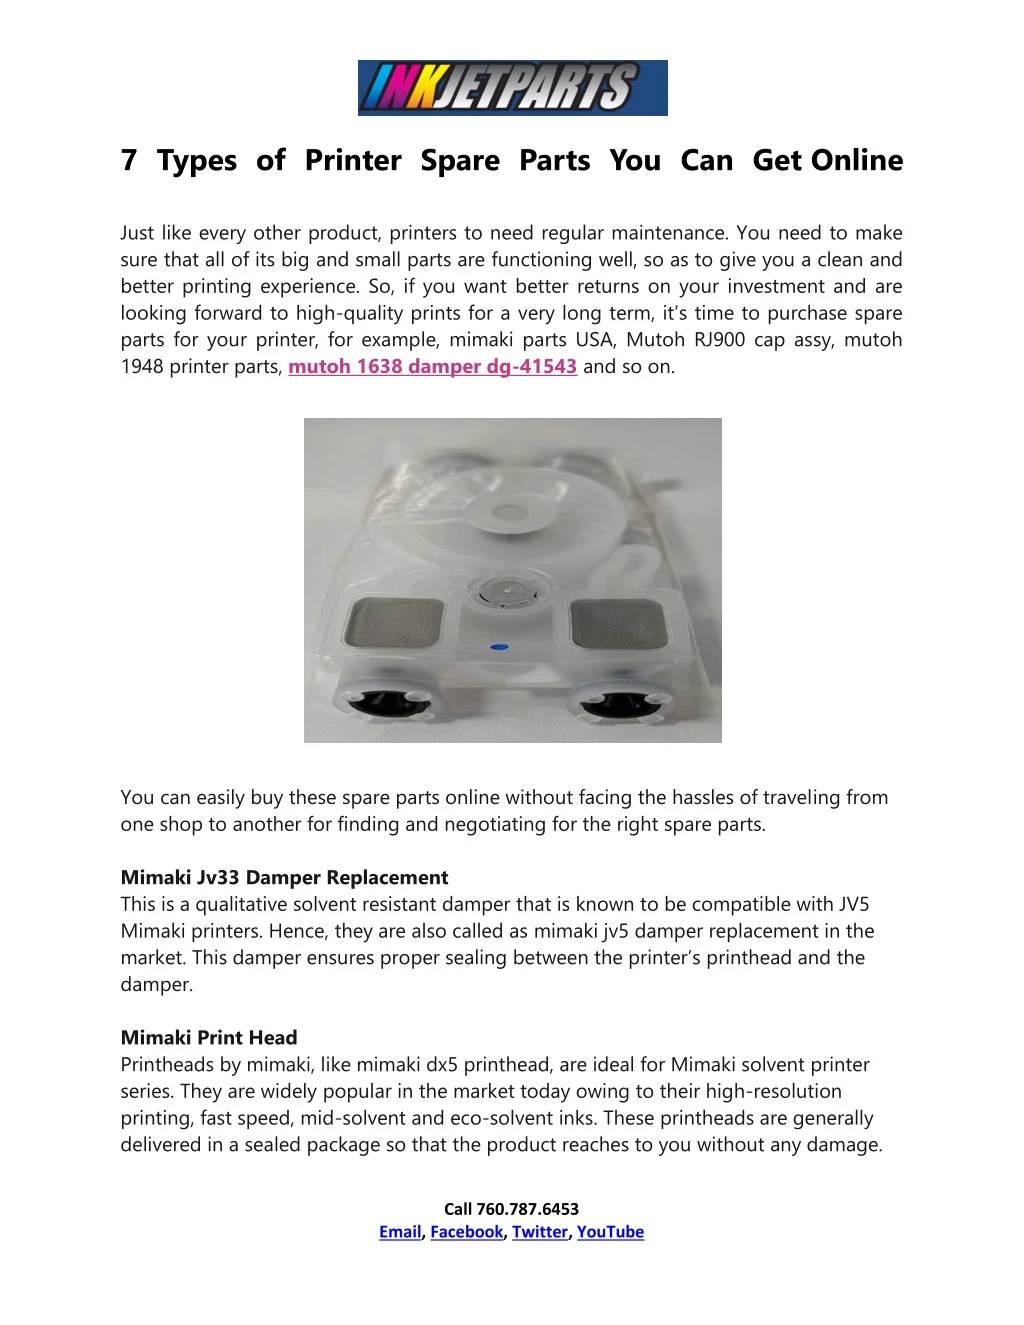 7 types of printer spare parts you can get online